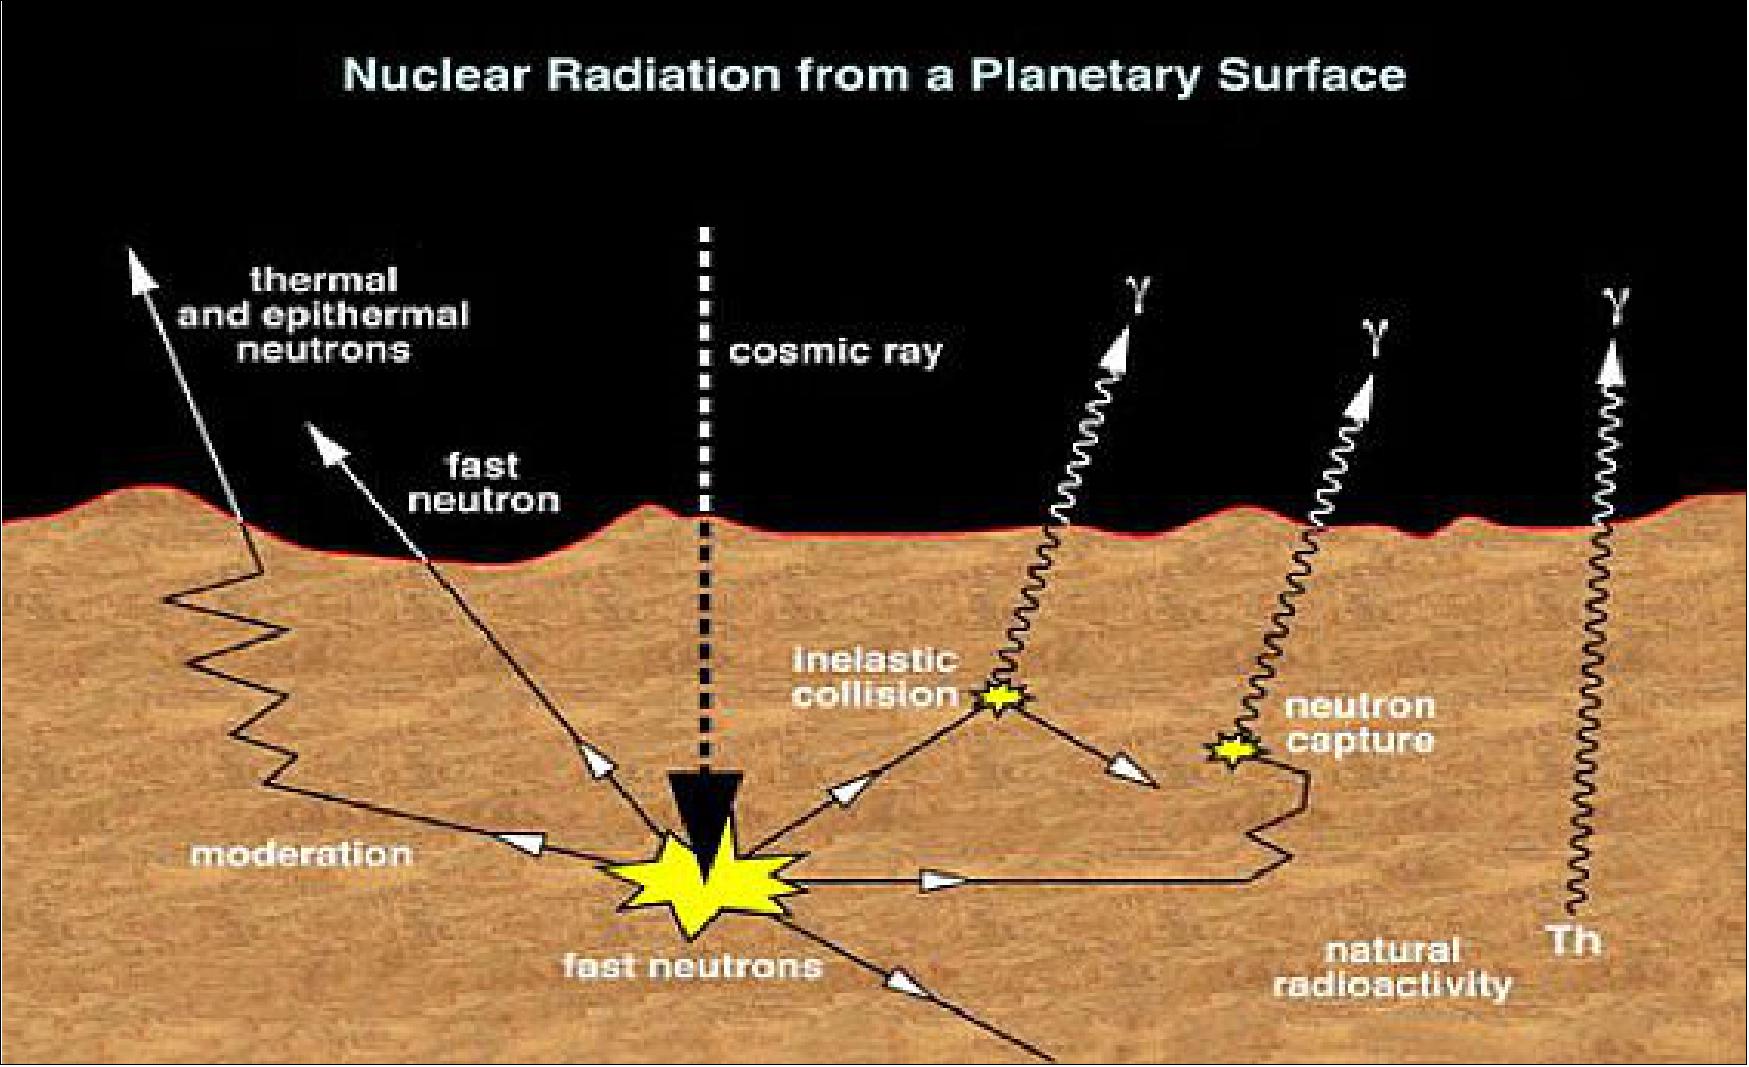 Figure 75: Galactic cosmic rays produce secondary neutrons which induce gamma-ray line emission from the surface of Mercury. Line emission also results from natural radioactive isotopes in the surface regolith (image credit: IKI)